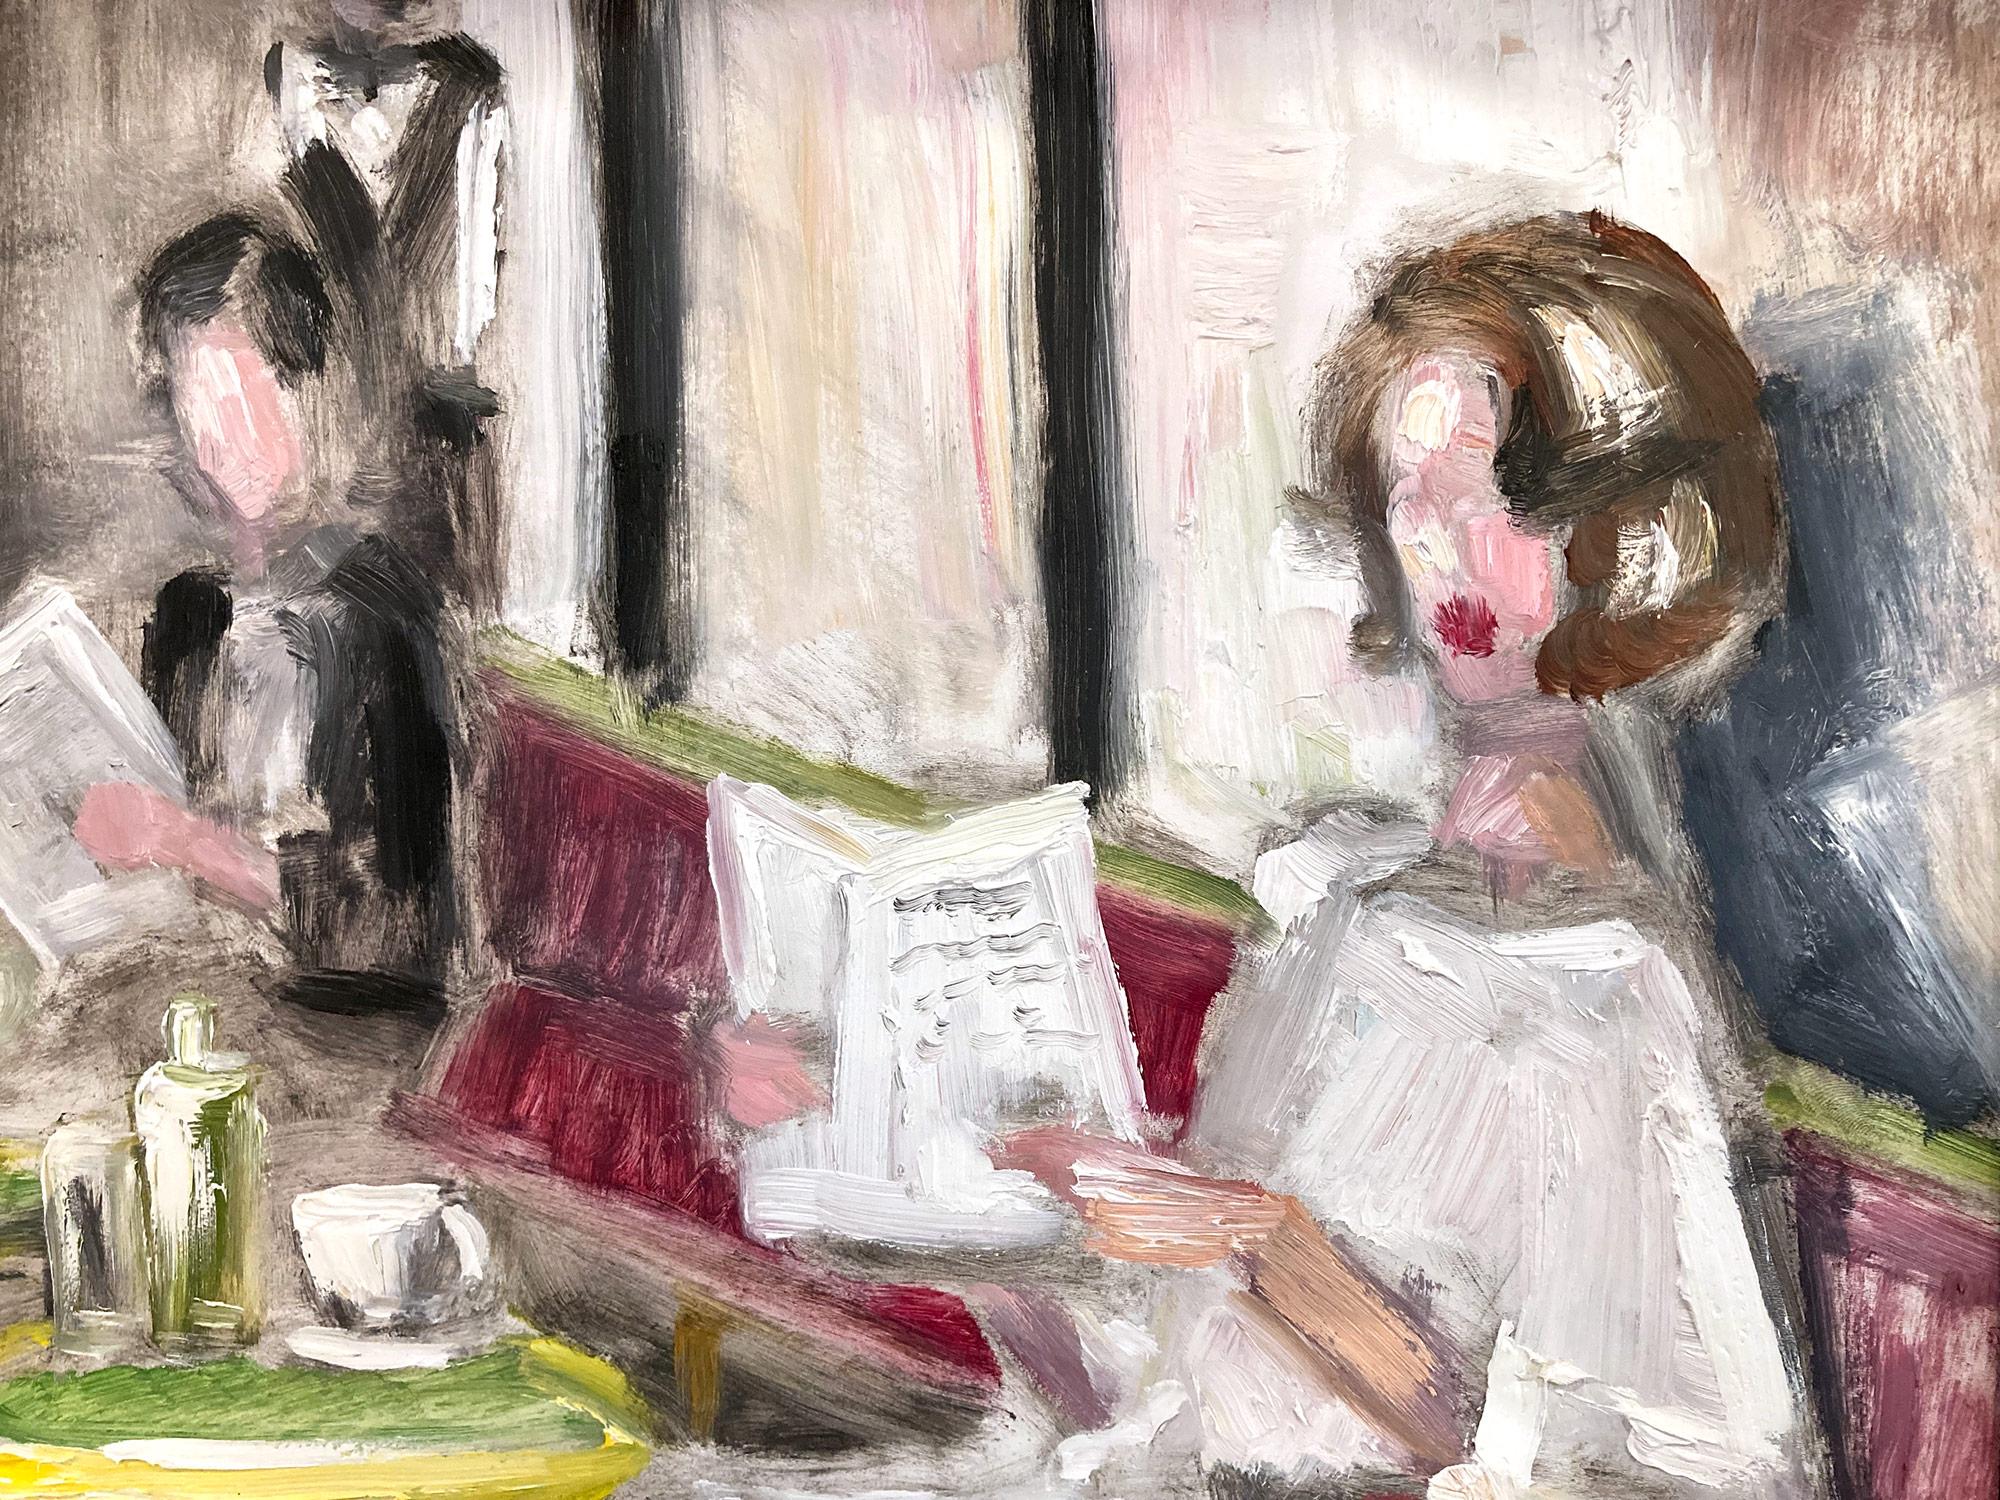 This painting depicts an impressionistic cafe scene of a Woman in Chanel. The thick brush strokes and fun marks creates an atmosphere reminiscent of the impressionists from the 20th Century. She soaks up the sun in a beautiful Chanel dress with high